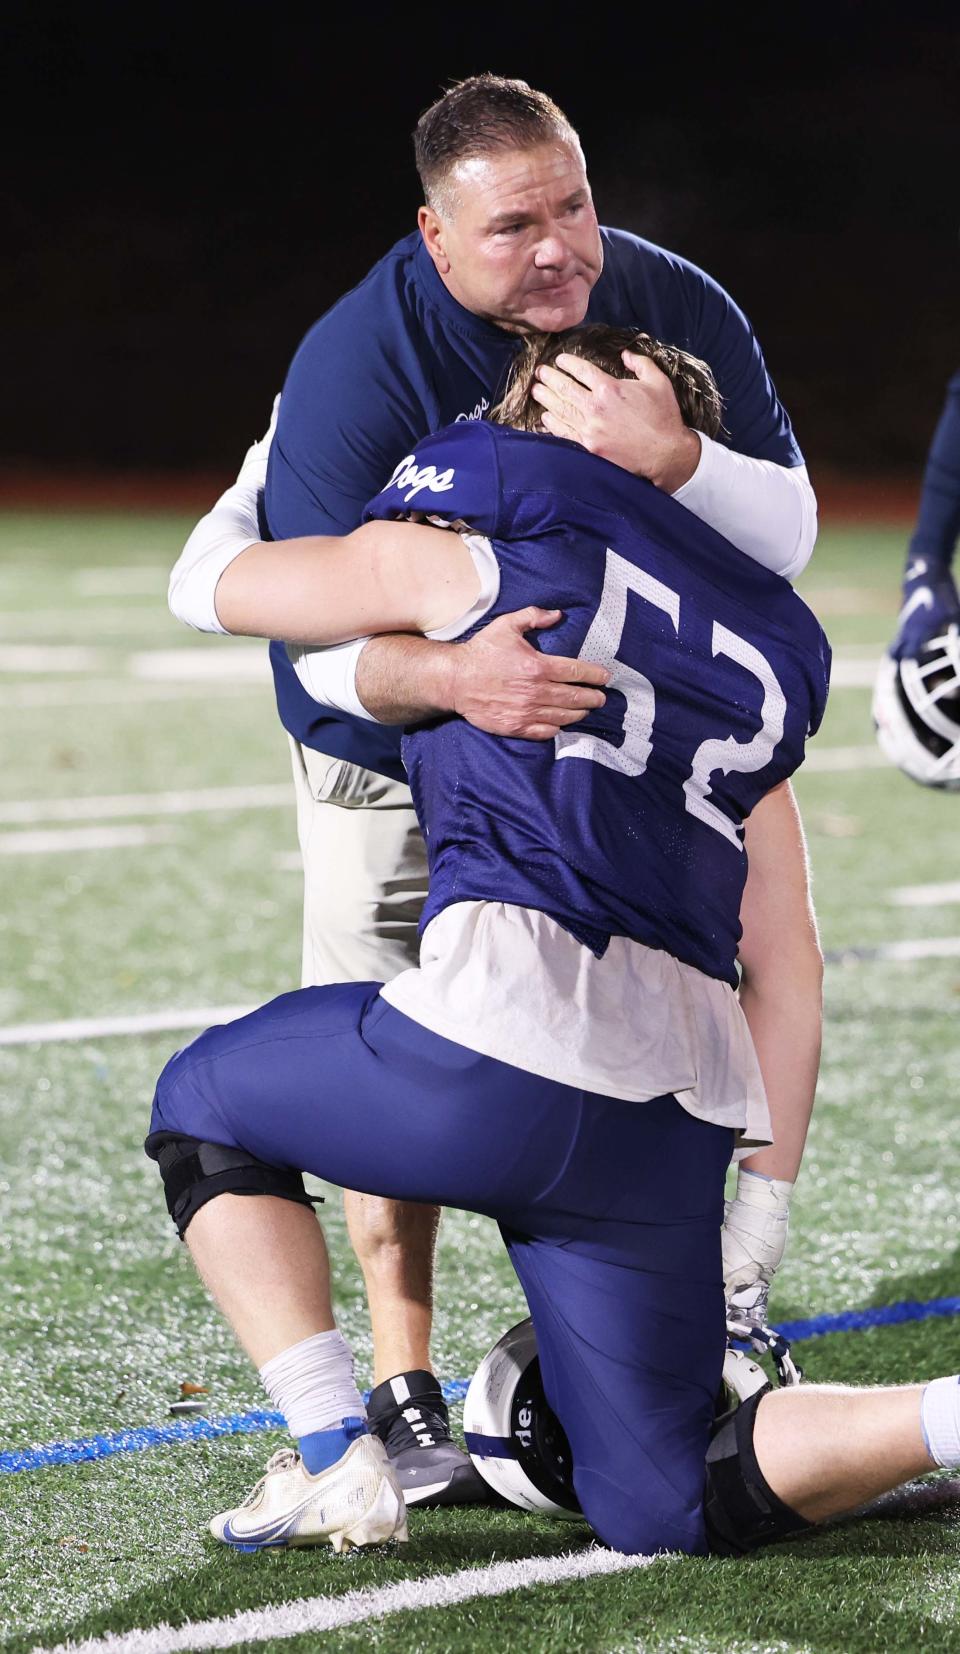 Rockland's Leary Costa is comforted at the conclusion of their game versus St. Mary's at Walpole High School on Friday, Nov. 18, 2022.   